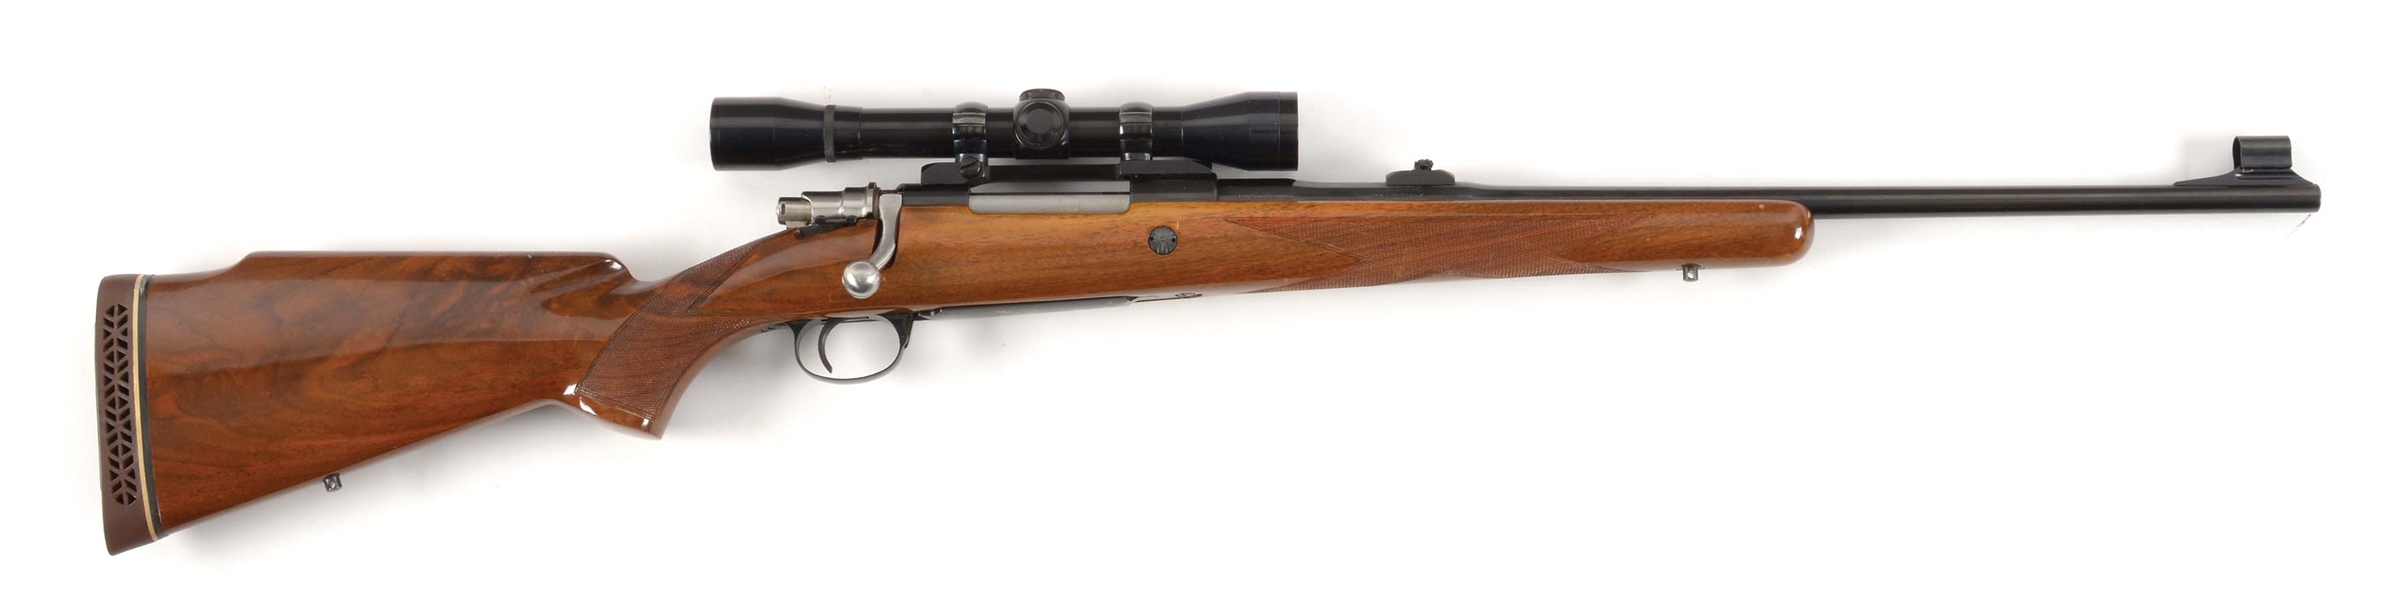 (M) BROWNING SAFARI .30-06 SPRINGFIELD BOLT ACTION RIFLE WITH SCOPE.